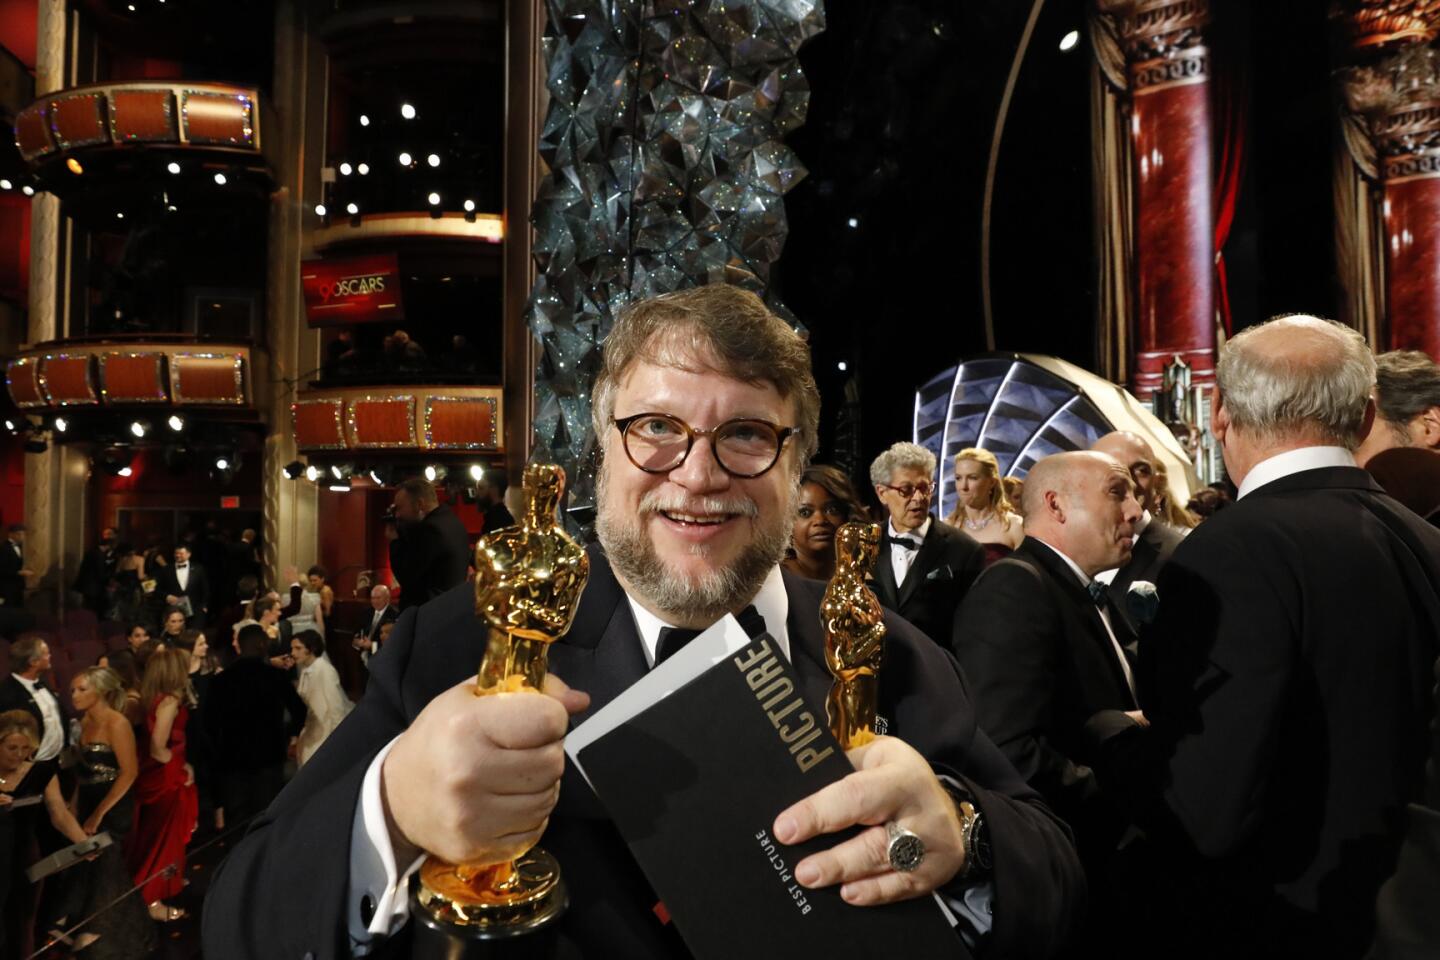 Oscar winner Guillermo del Toro ("The Shape of Water") backstage at the 90th Academy Awards.